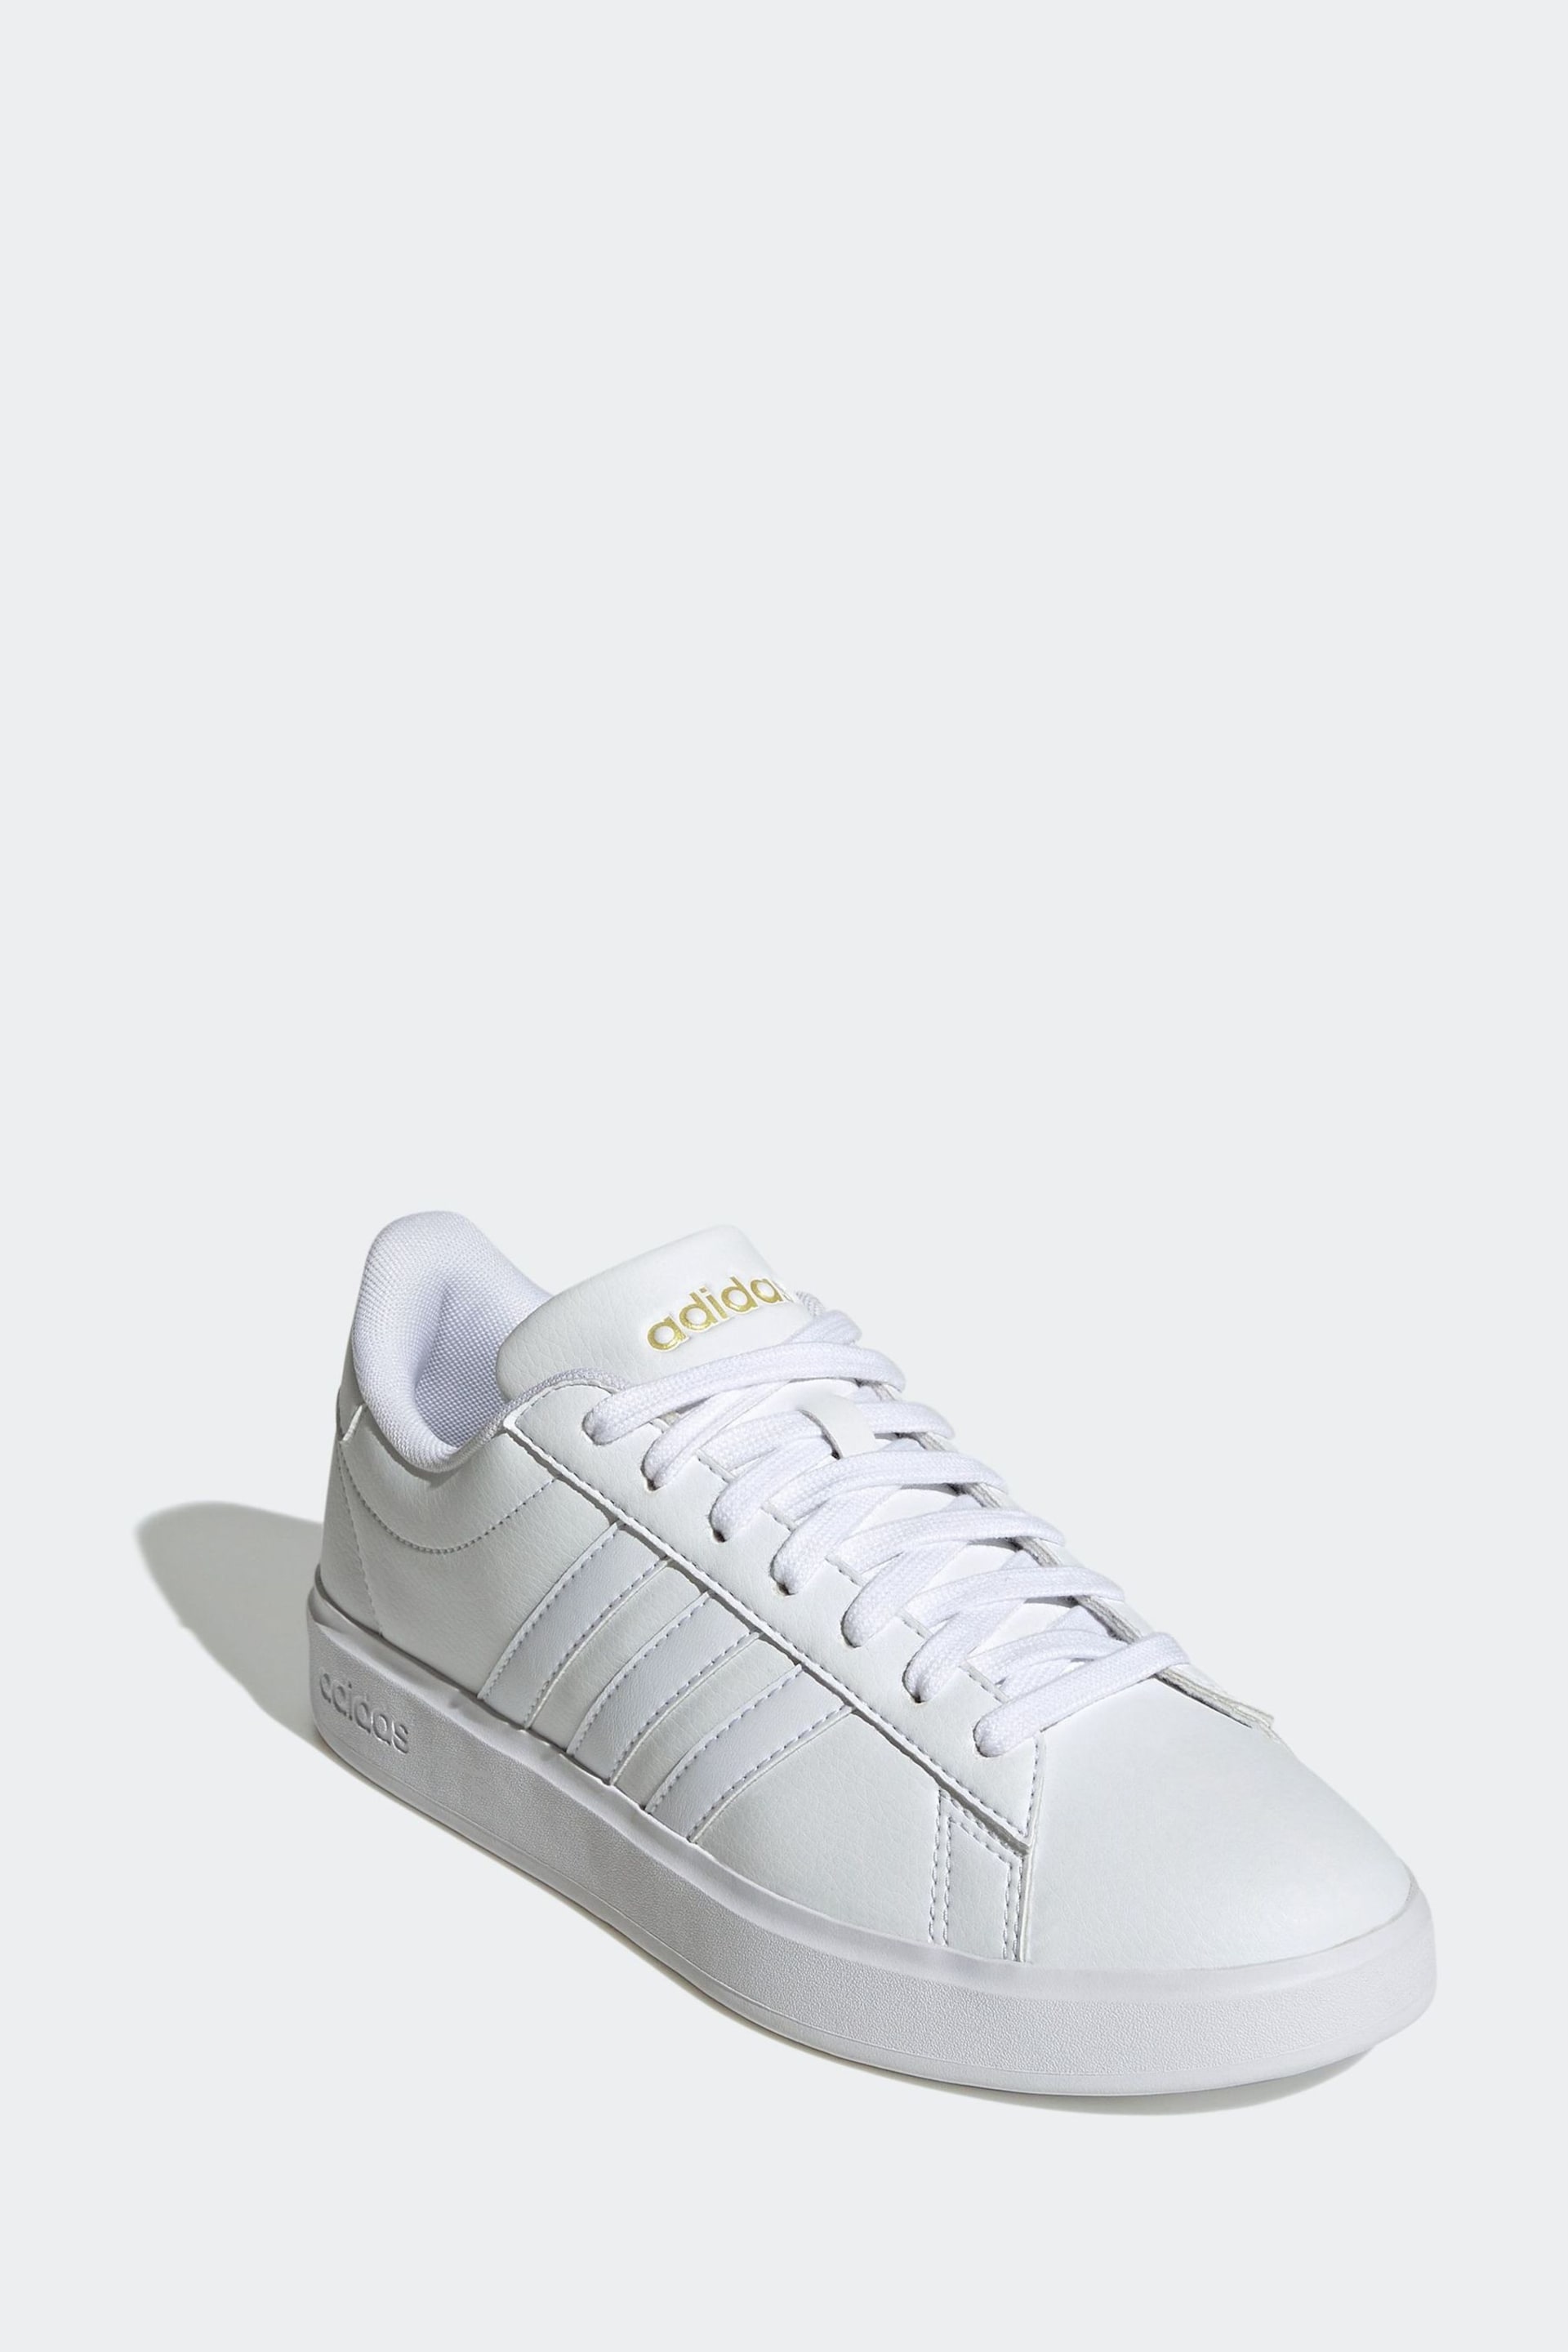 adidas White Grand Court Cloudfoam Lifestyle Comfort Trainers - Image 3 of 9